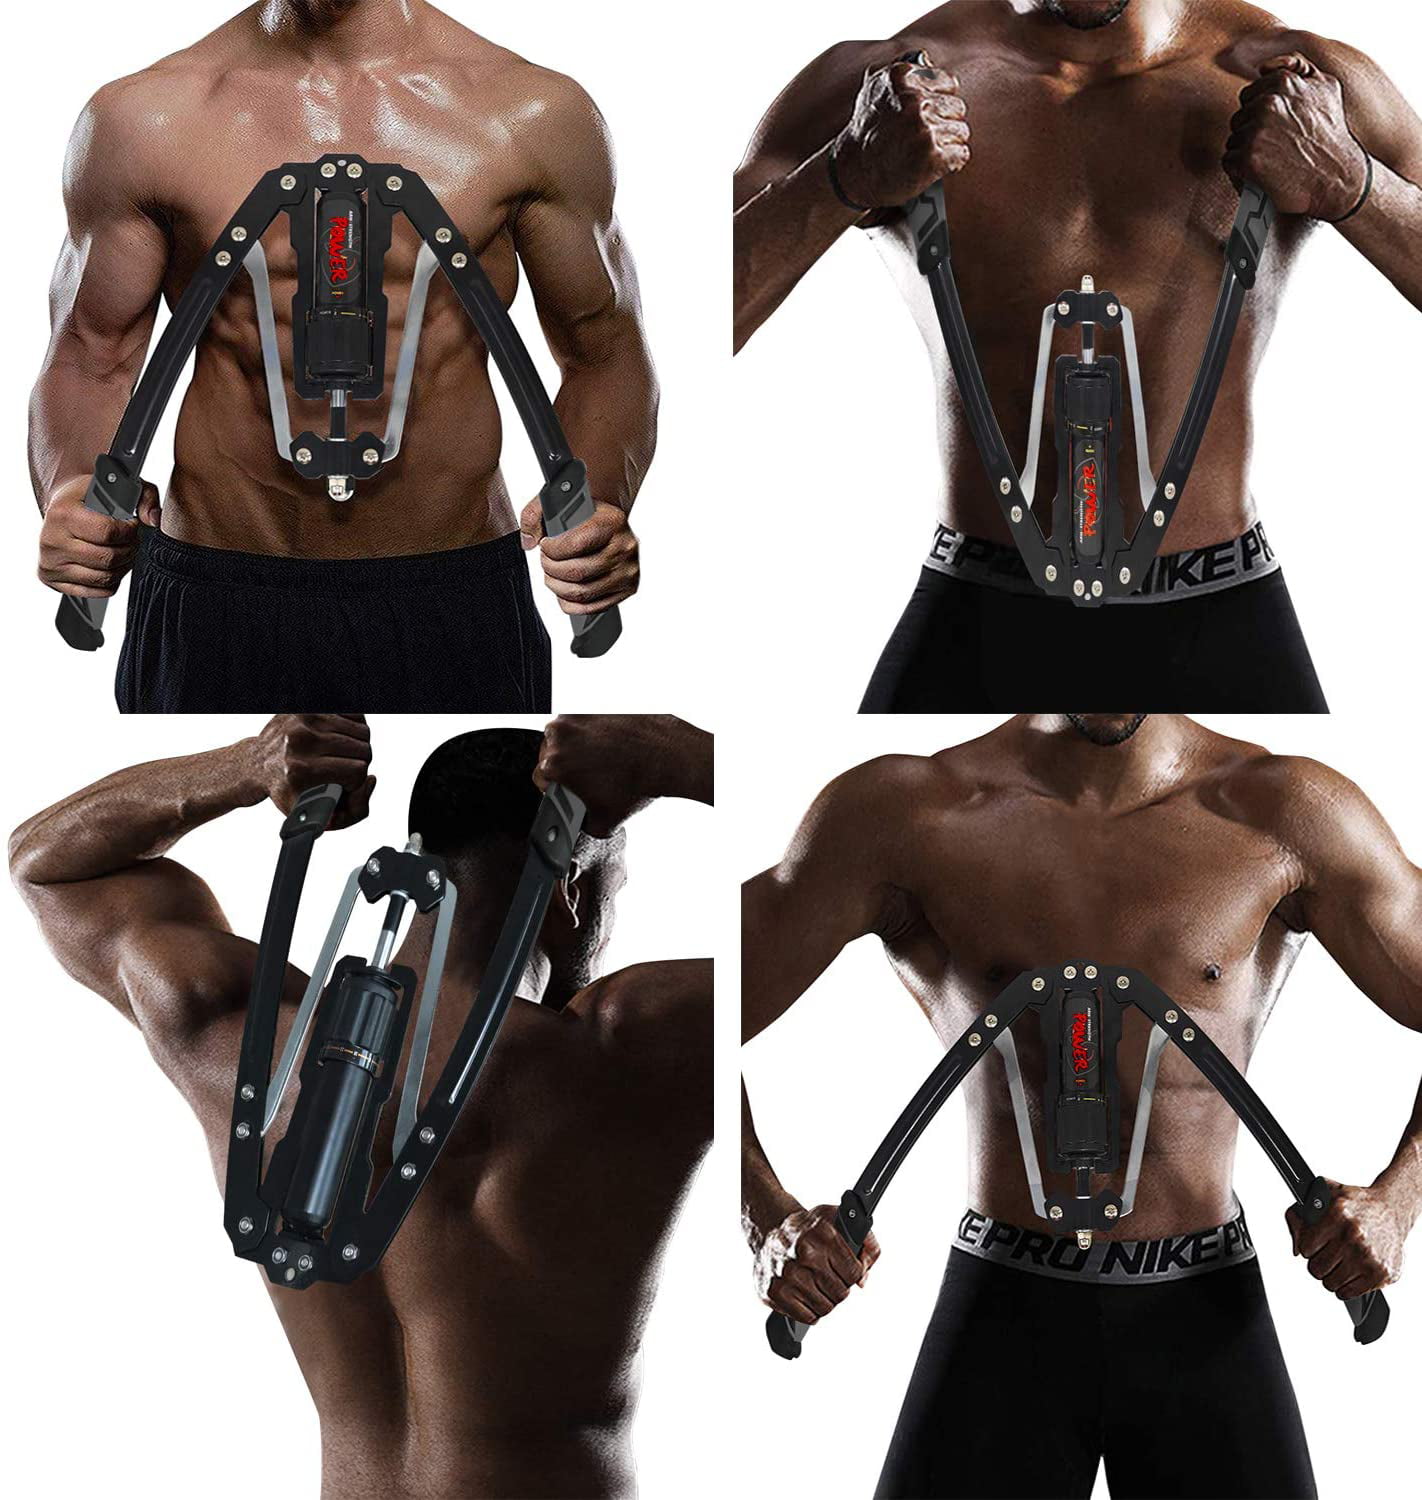 Adjustable Hydraulic Chest Arm Strength Expander Exercise Muscle Training Device 